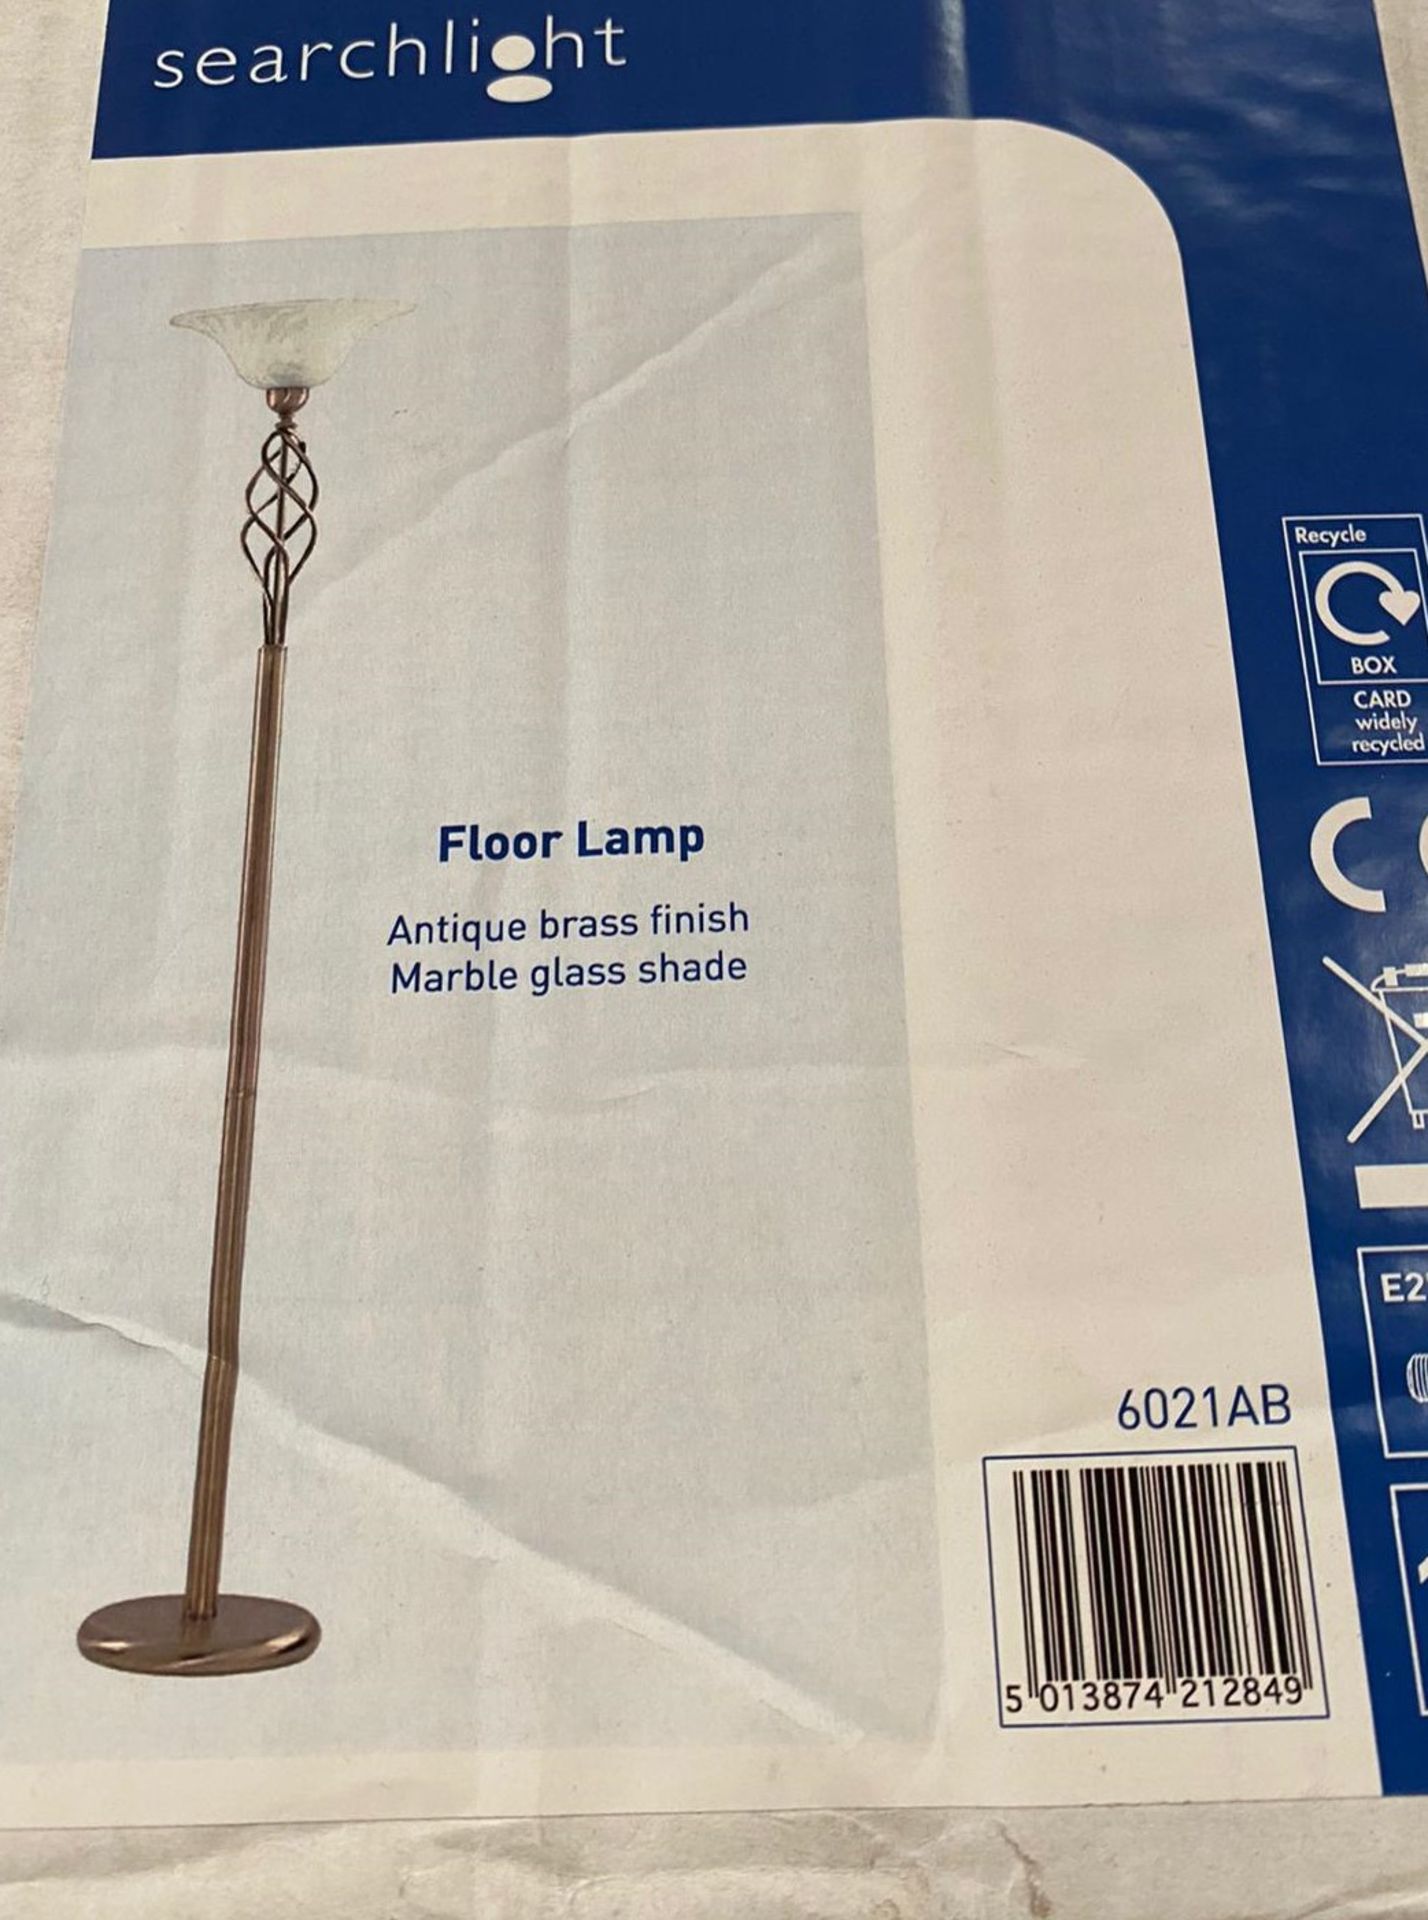 1 x Searchlight Floor Lamp in Antique Brass - Ref: 6021AB - New and Boxed - RRP: £100